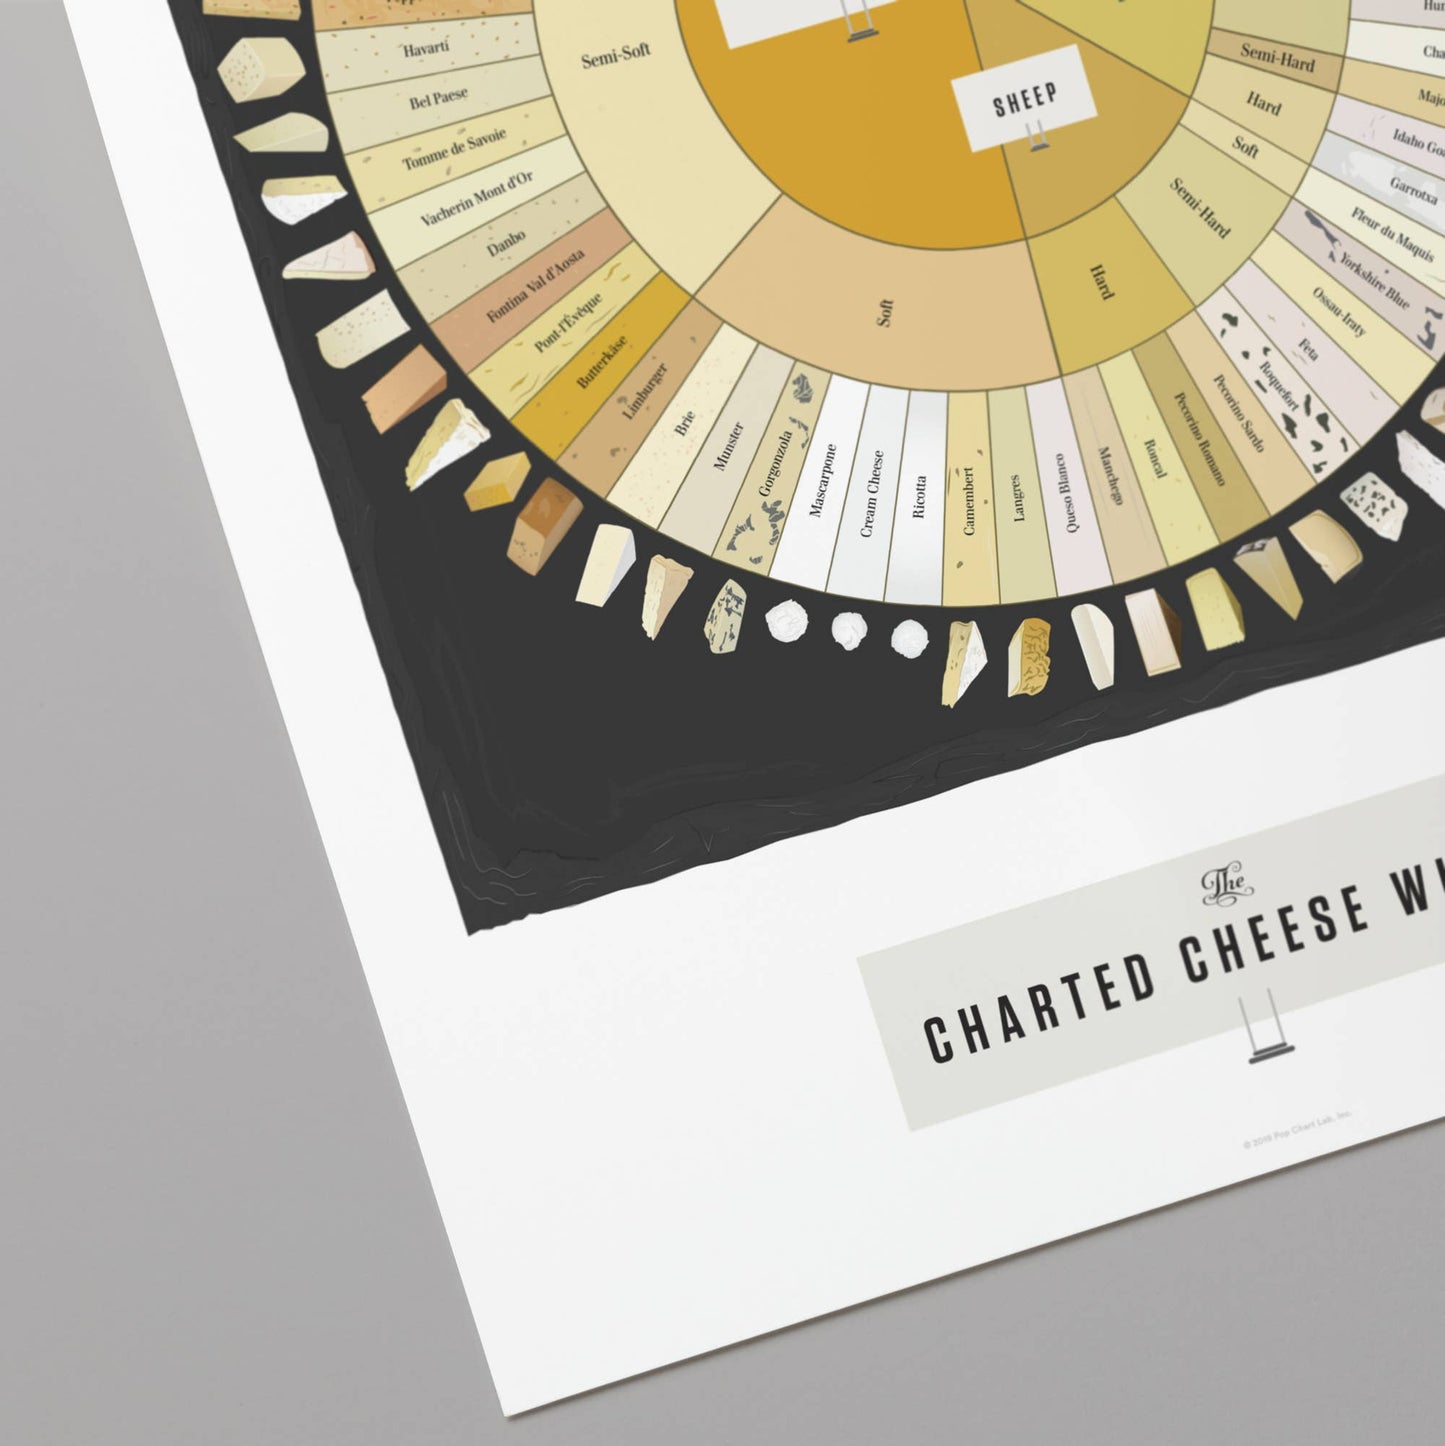 The Charted Cheese Wheel | 16" x 20" print